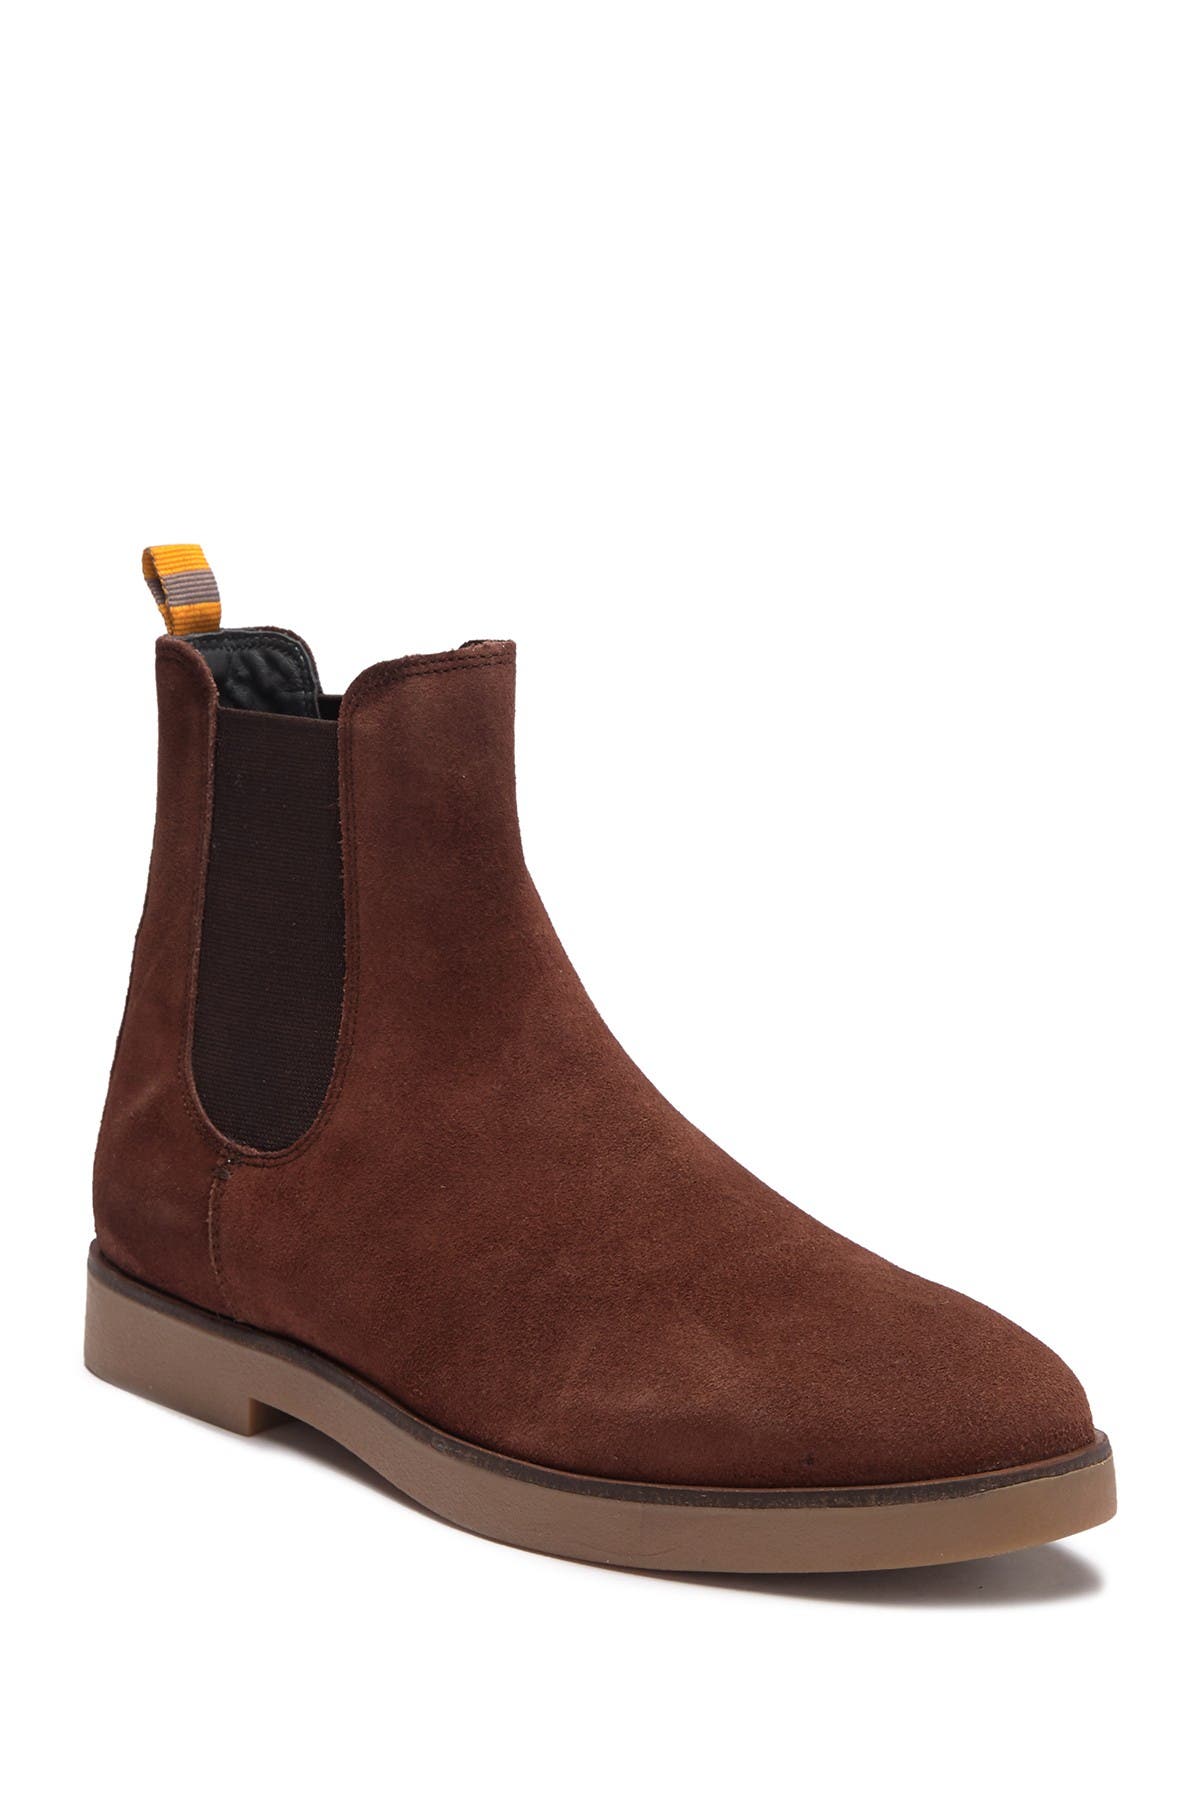 frank wright suede chelsea boots